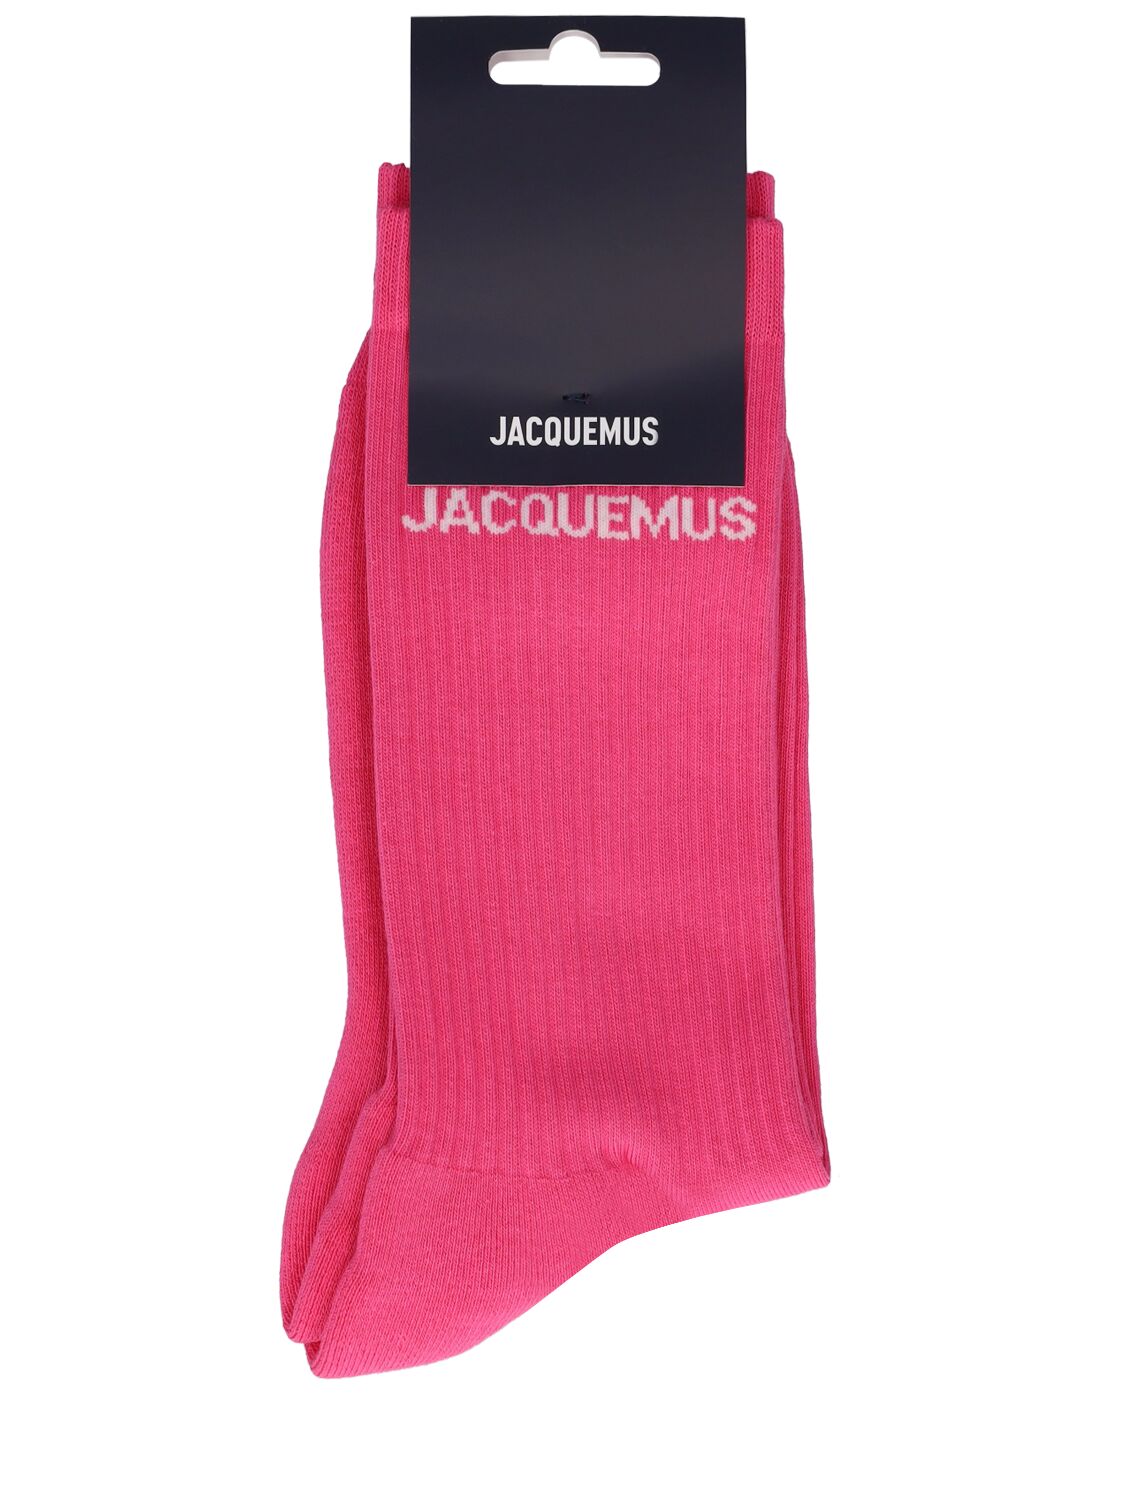 Jacquemus Les Chaussettes  Cotton Socks In Dark Pink